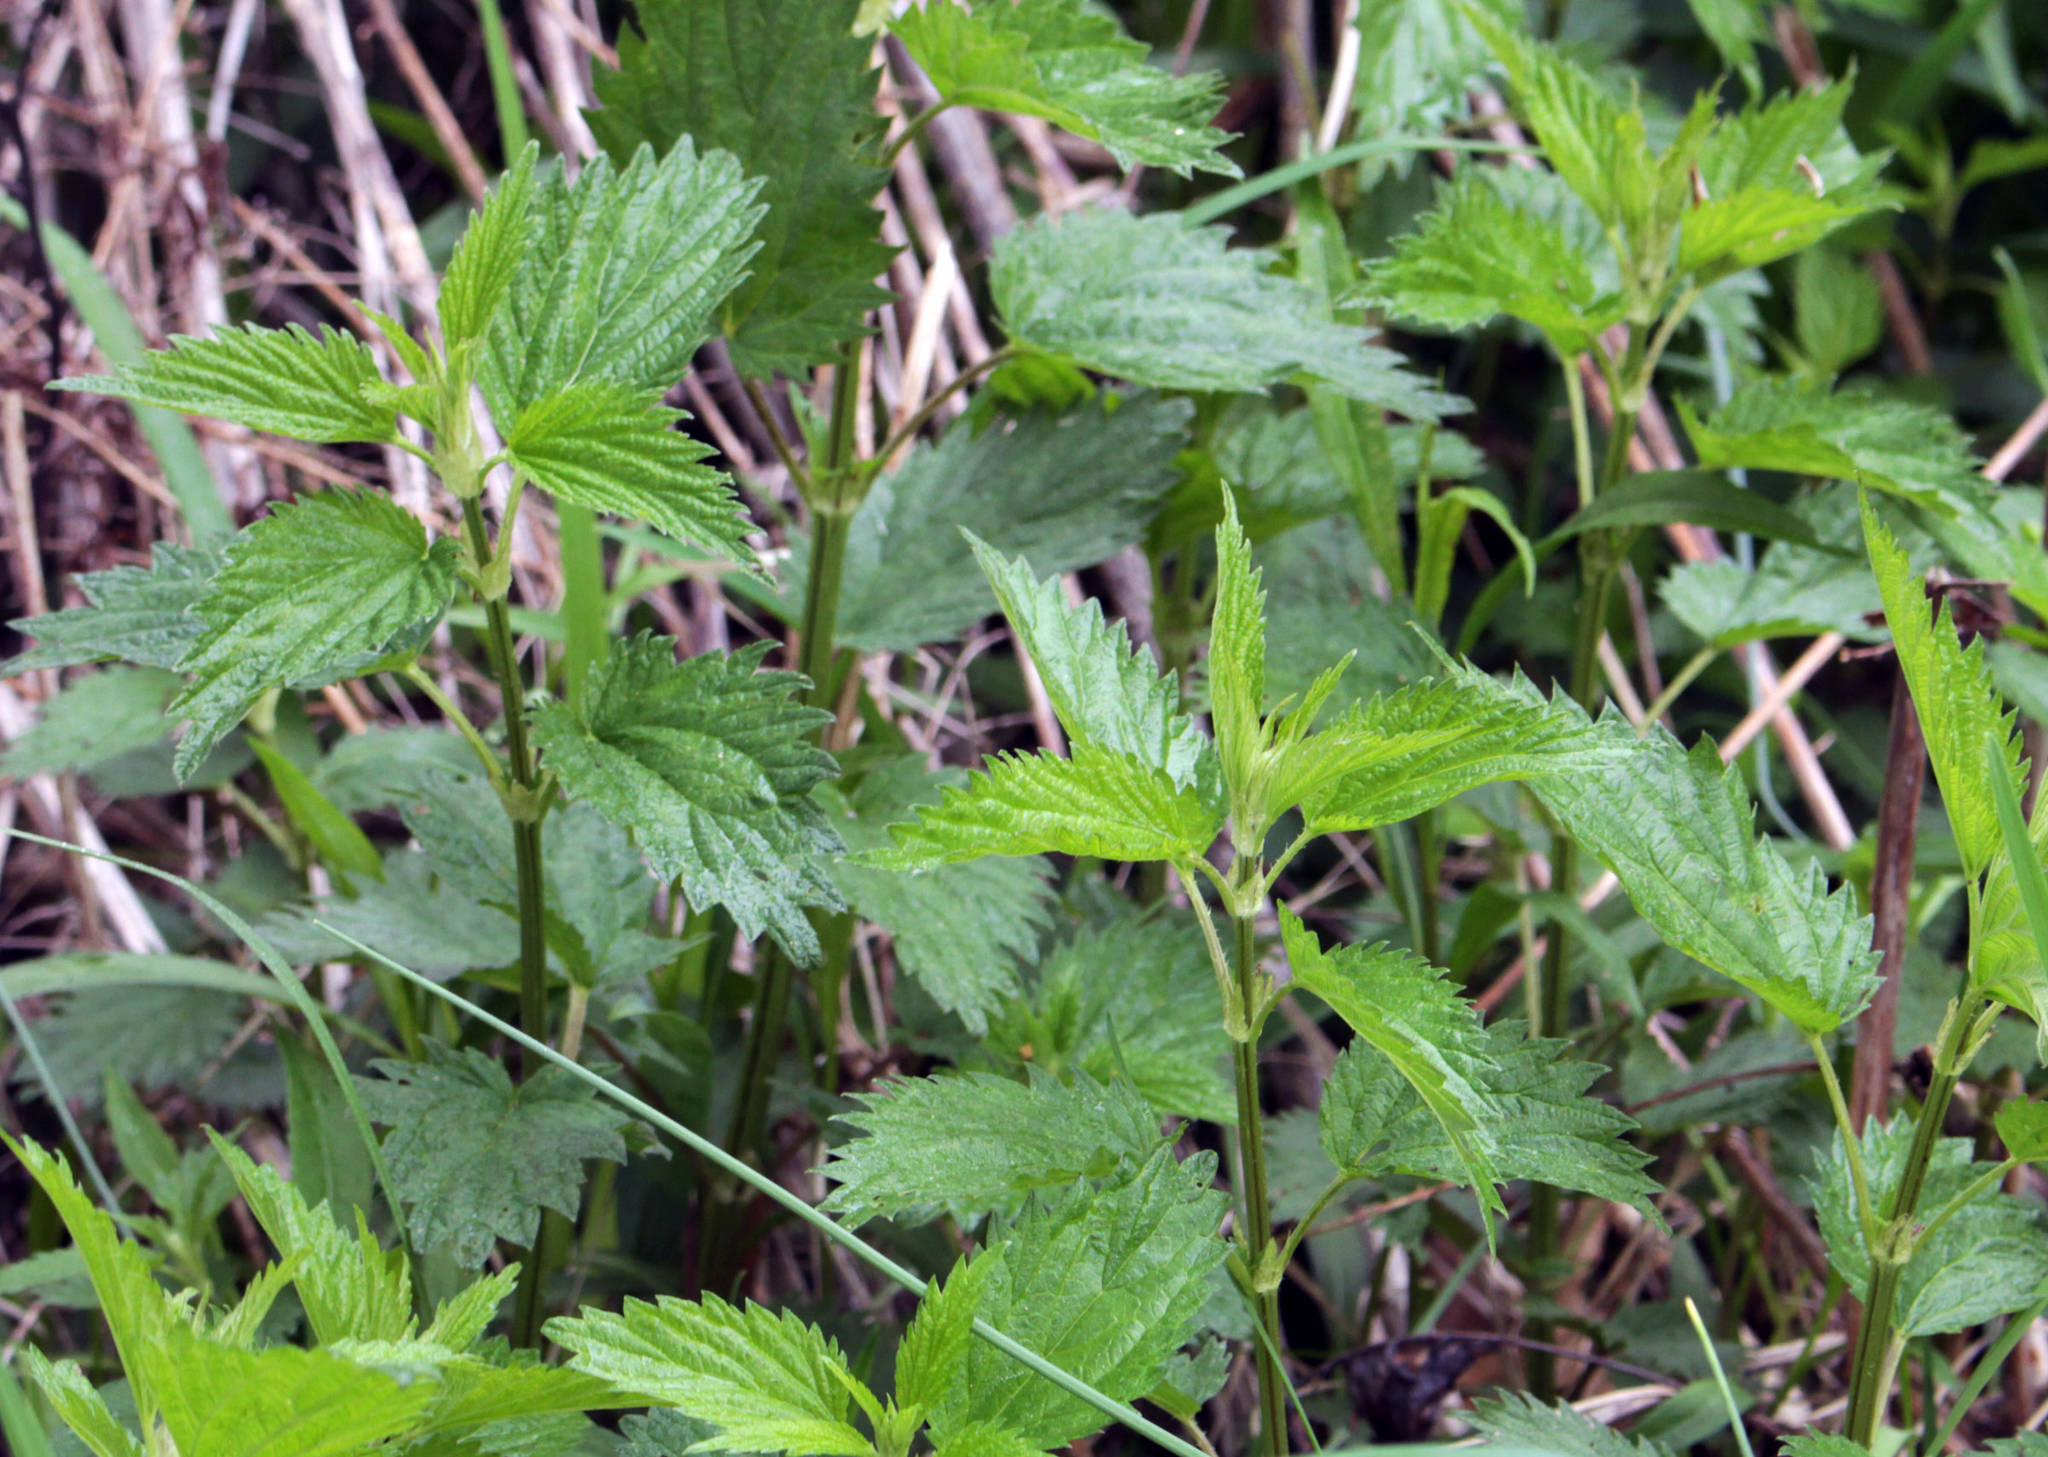 This undated photo shows stinging nettles in New Paltz, N.Y. Nettles is a weed and it stings, but it also is a healthful and tasty plant. (Lee Reich via AP)